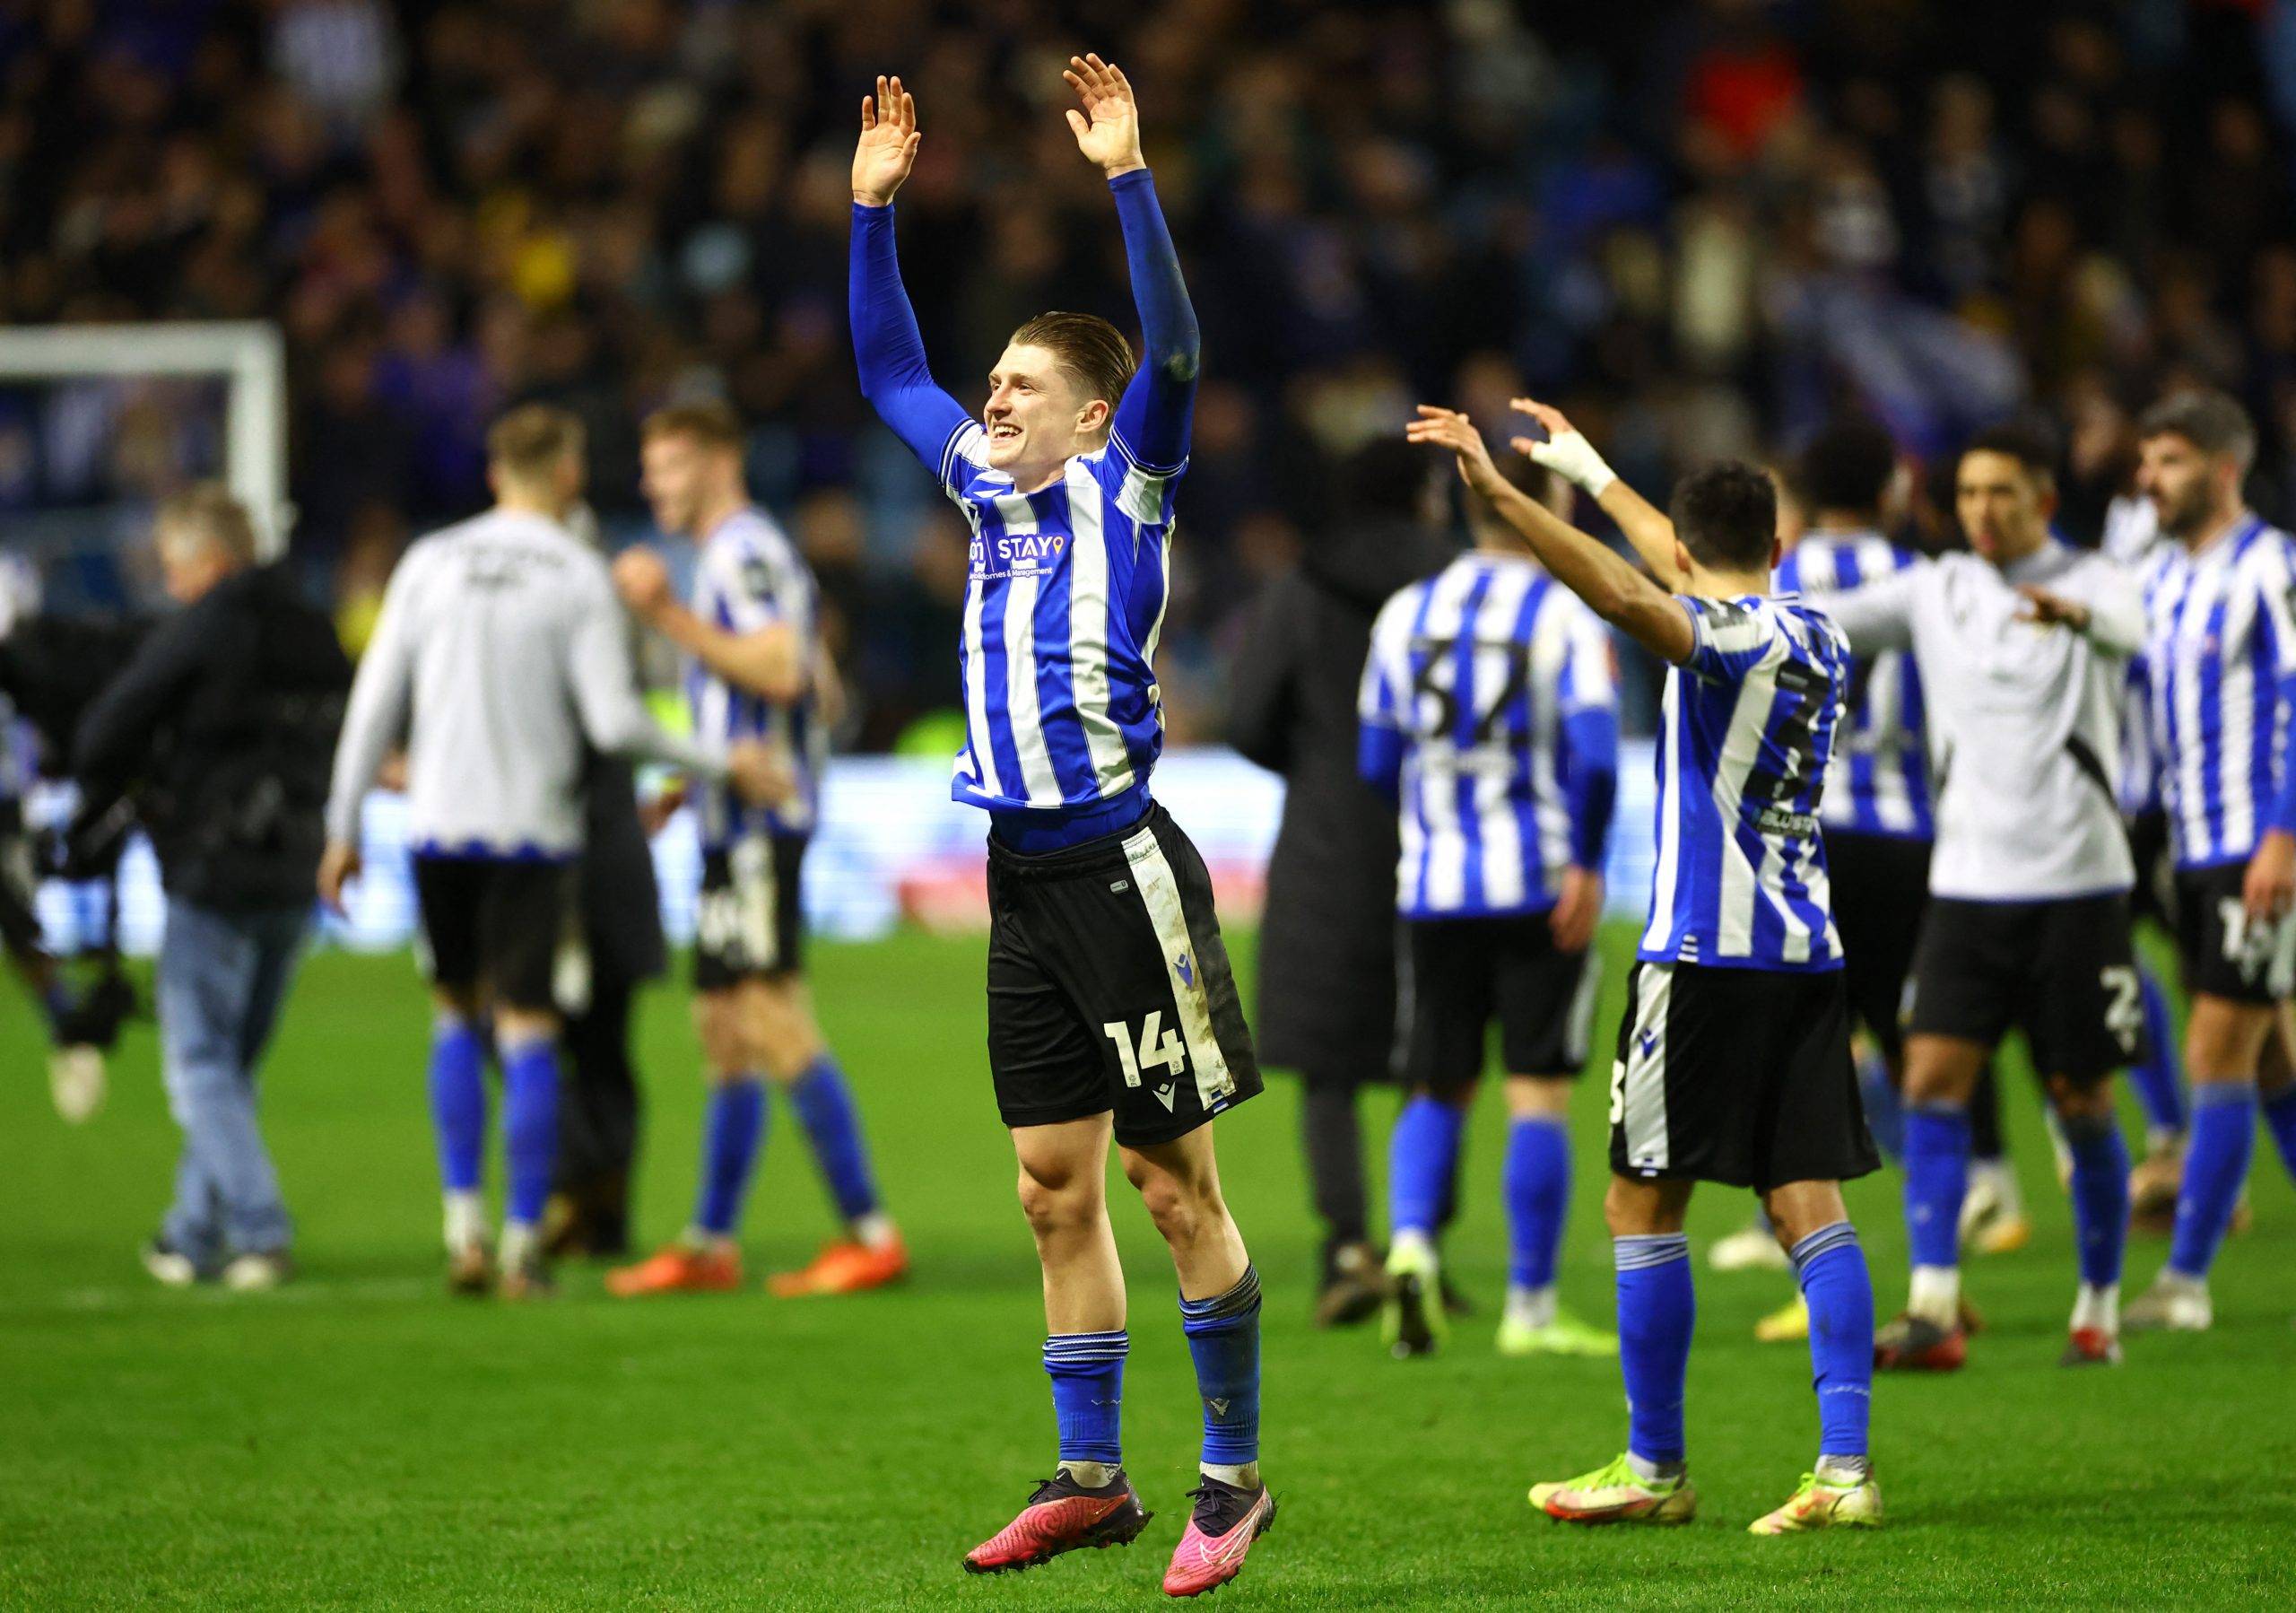 Sheffield Wednesday: George Byers 'available' vs MK Dons - League One News